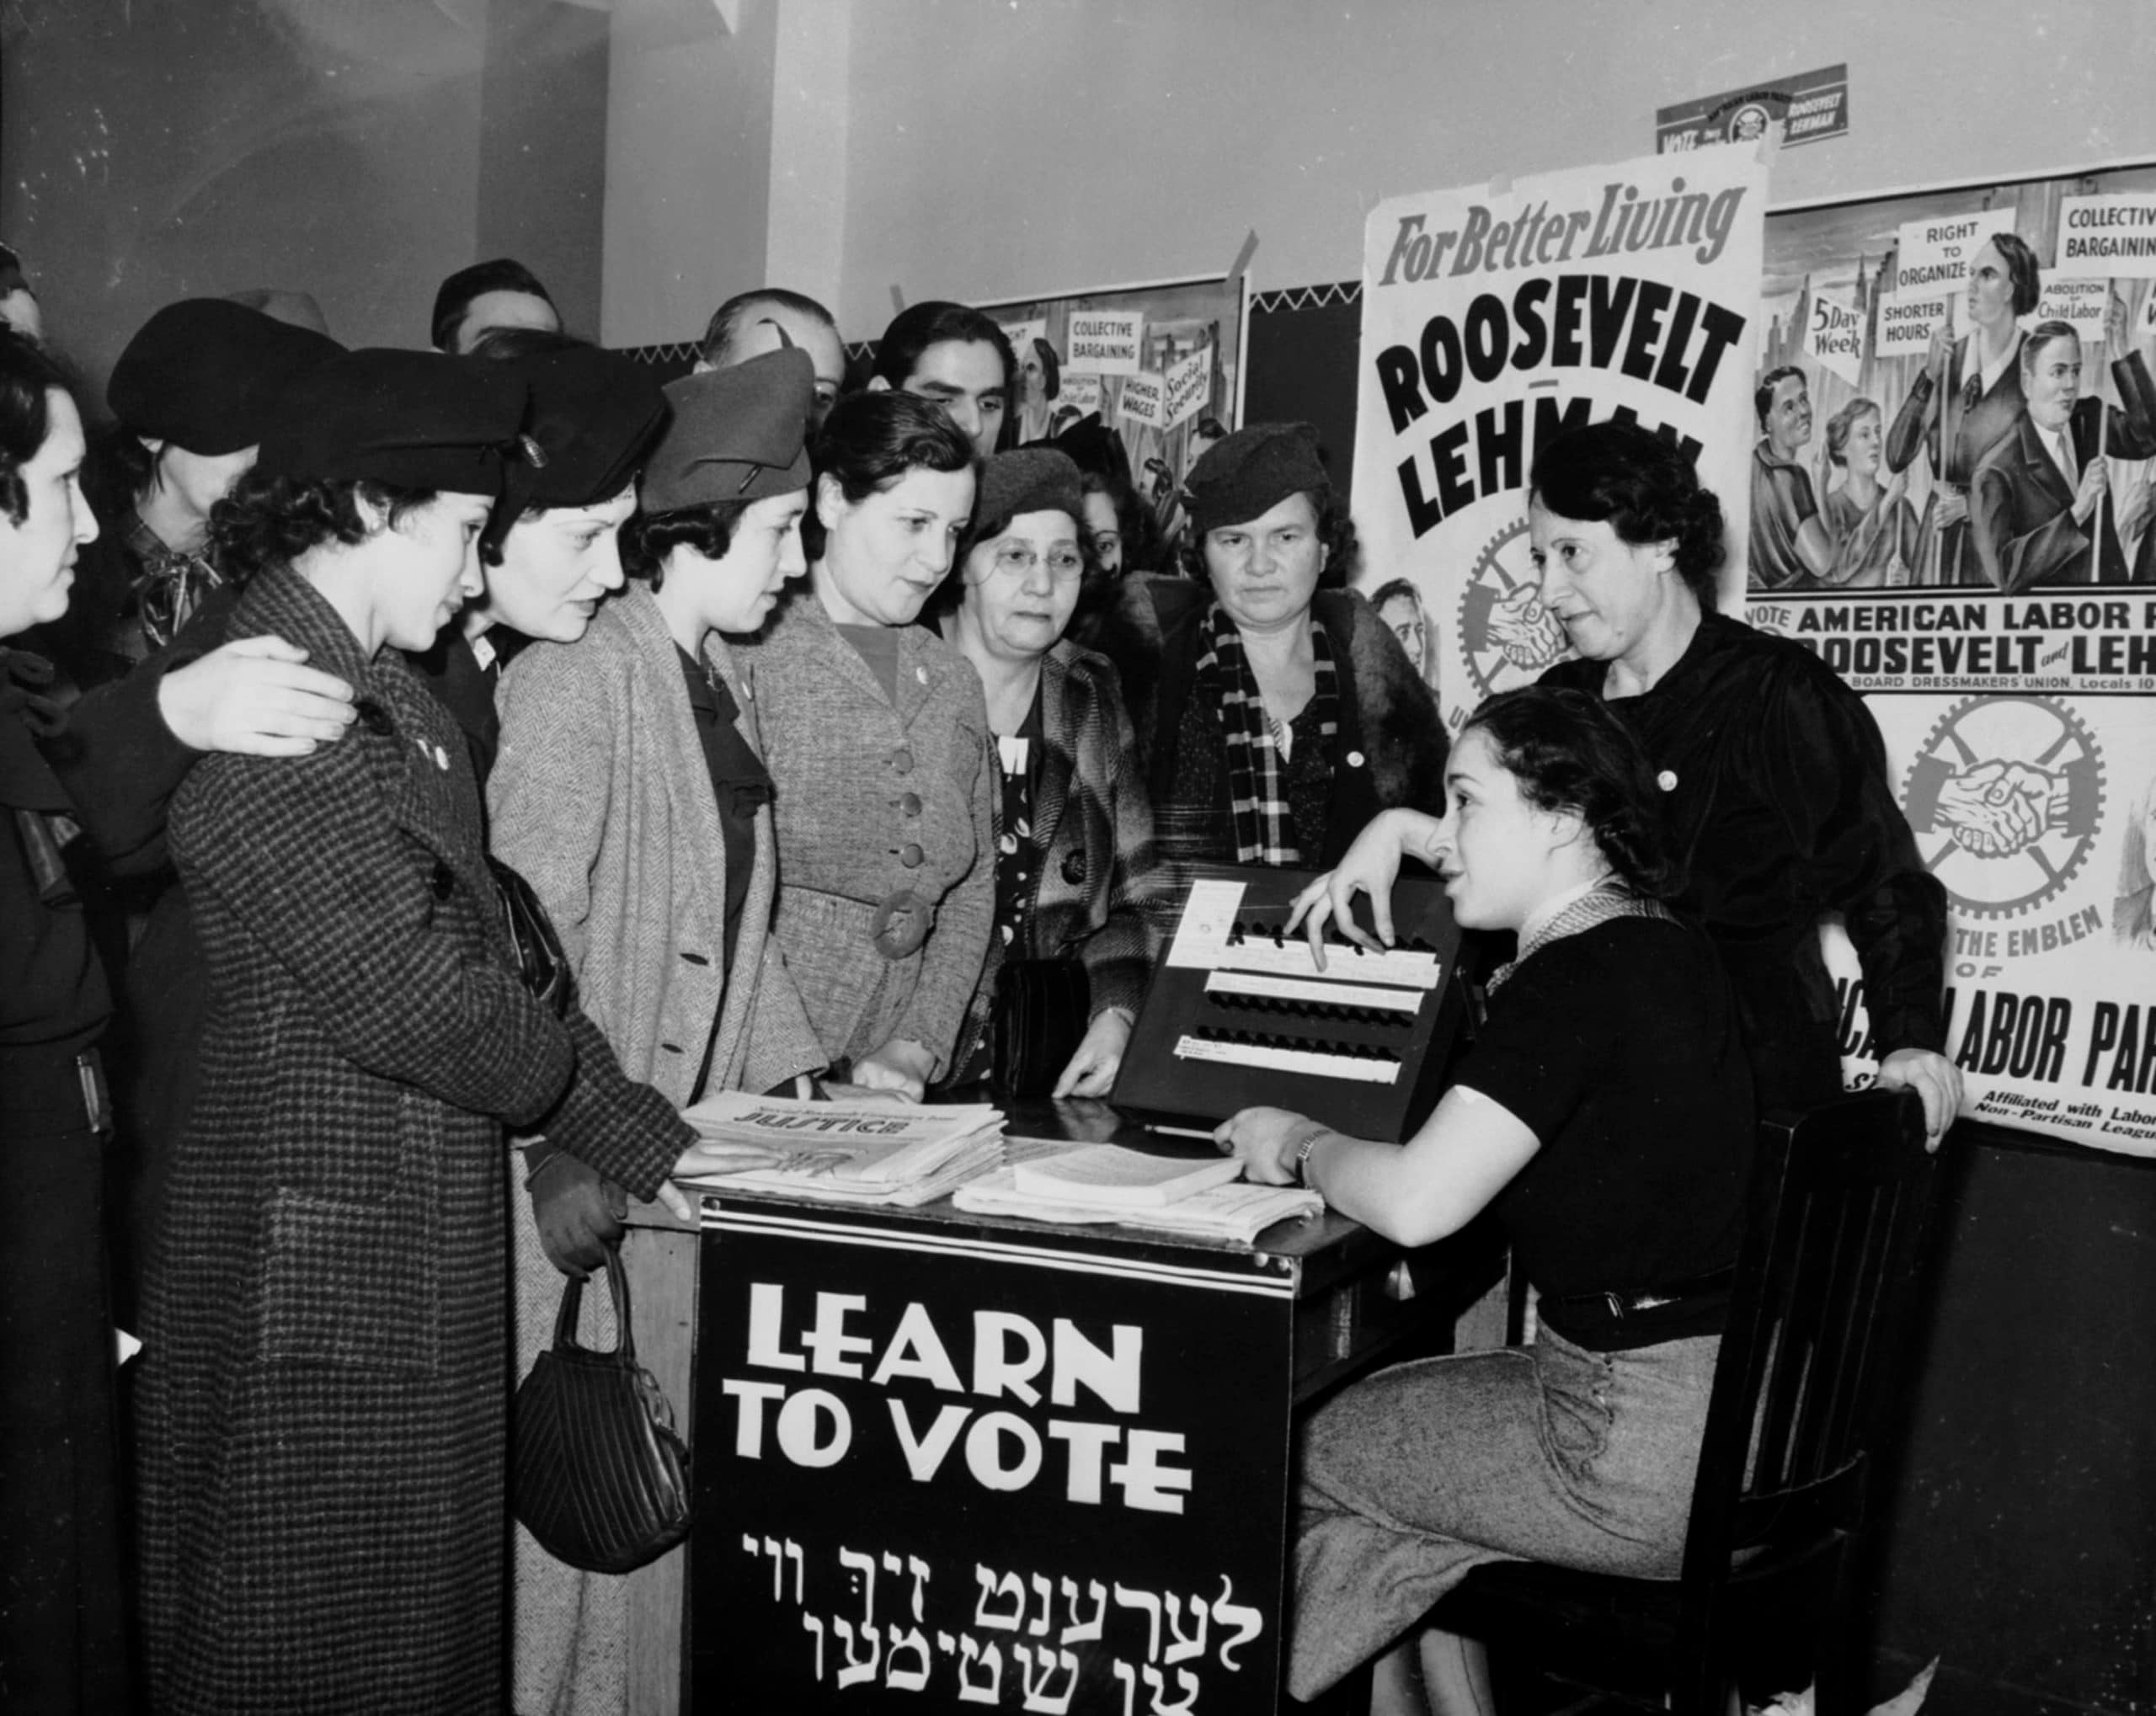 Women won the vote in 1920: Here are 13 quotes to celebrate how far we’ve come and where we need to go from here